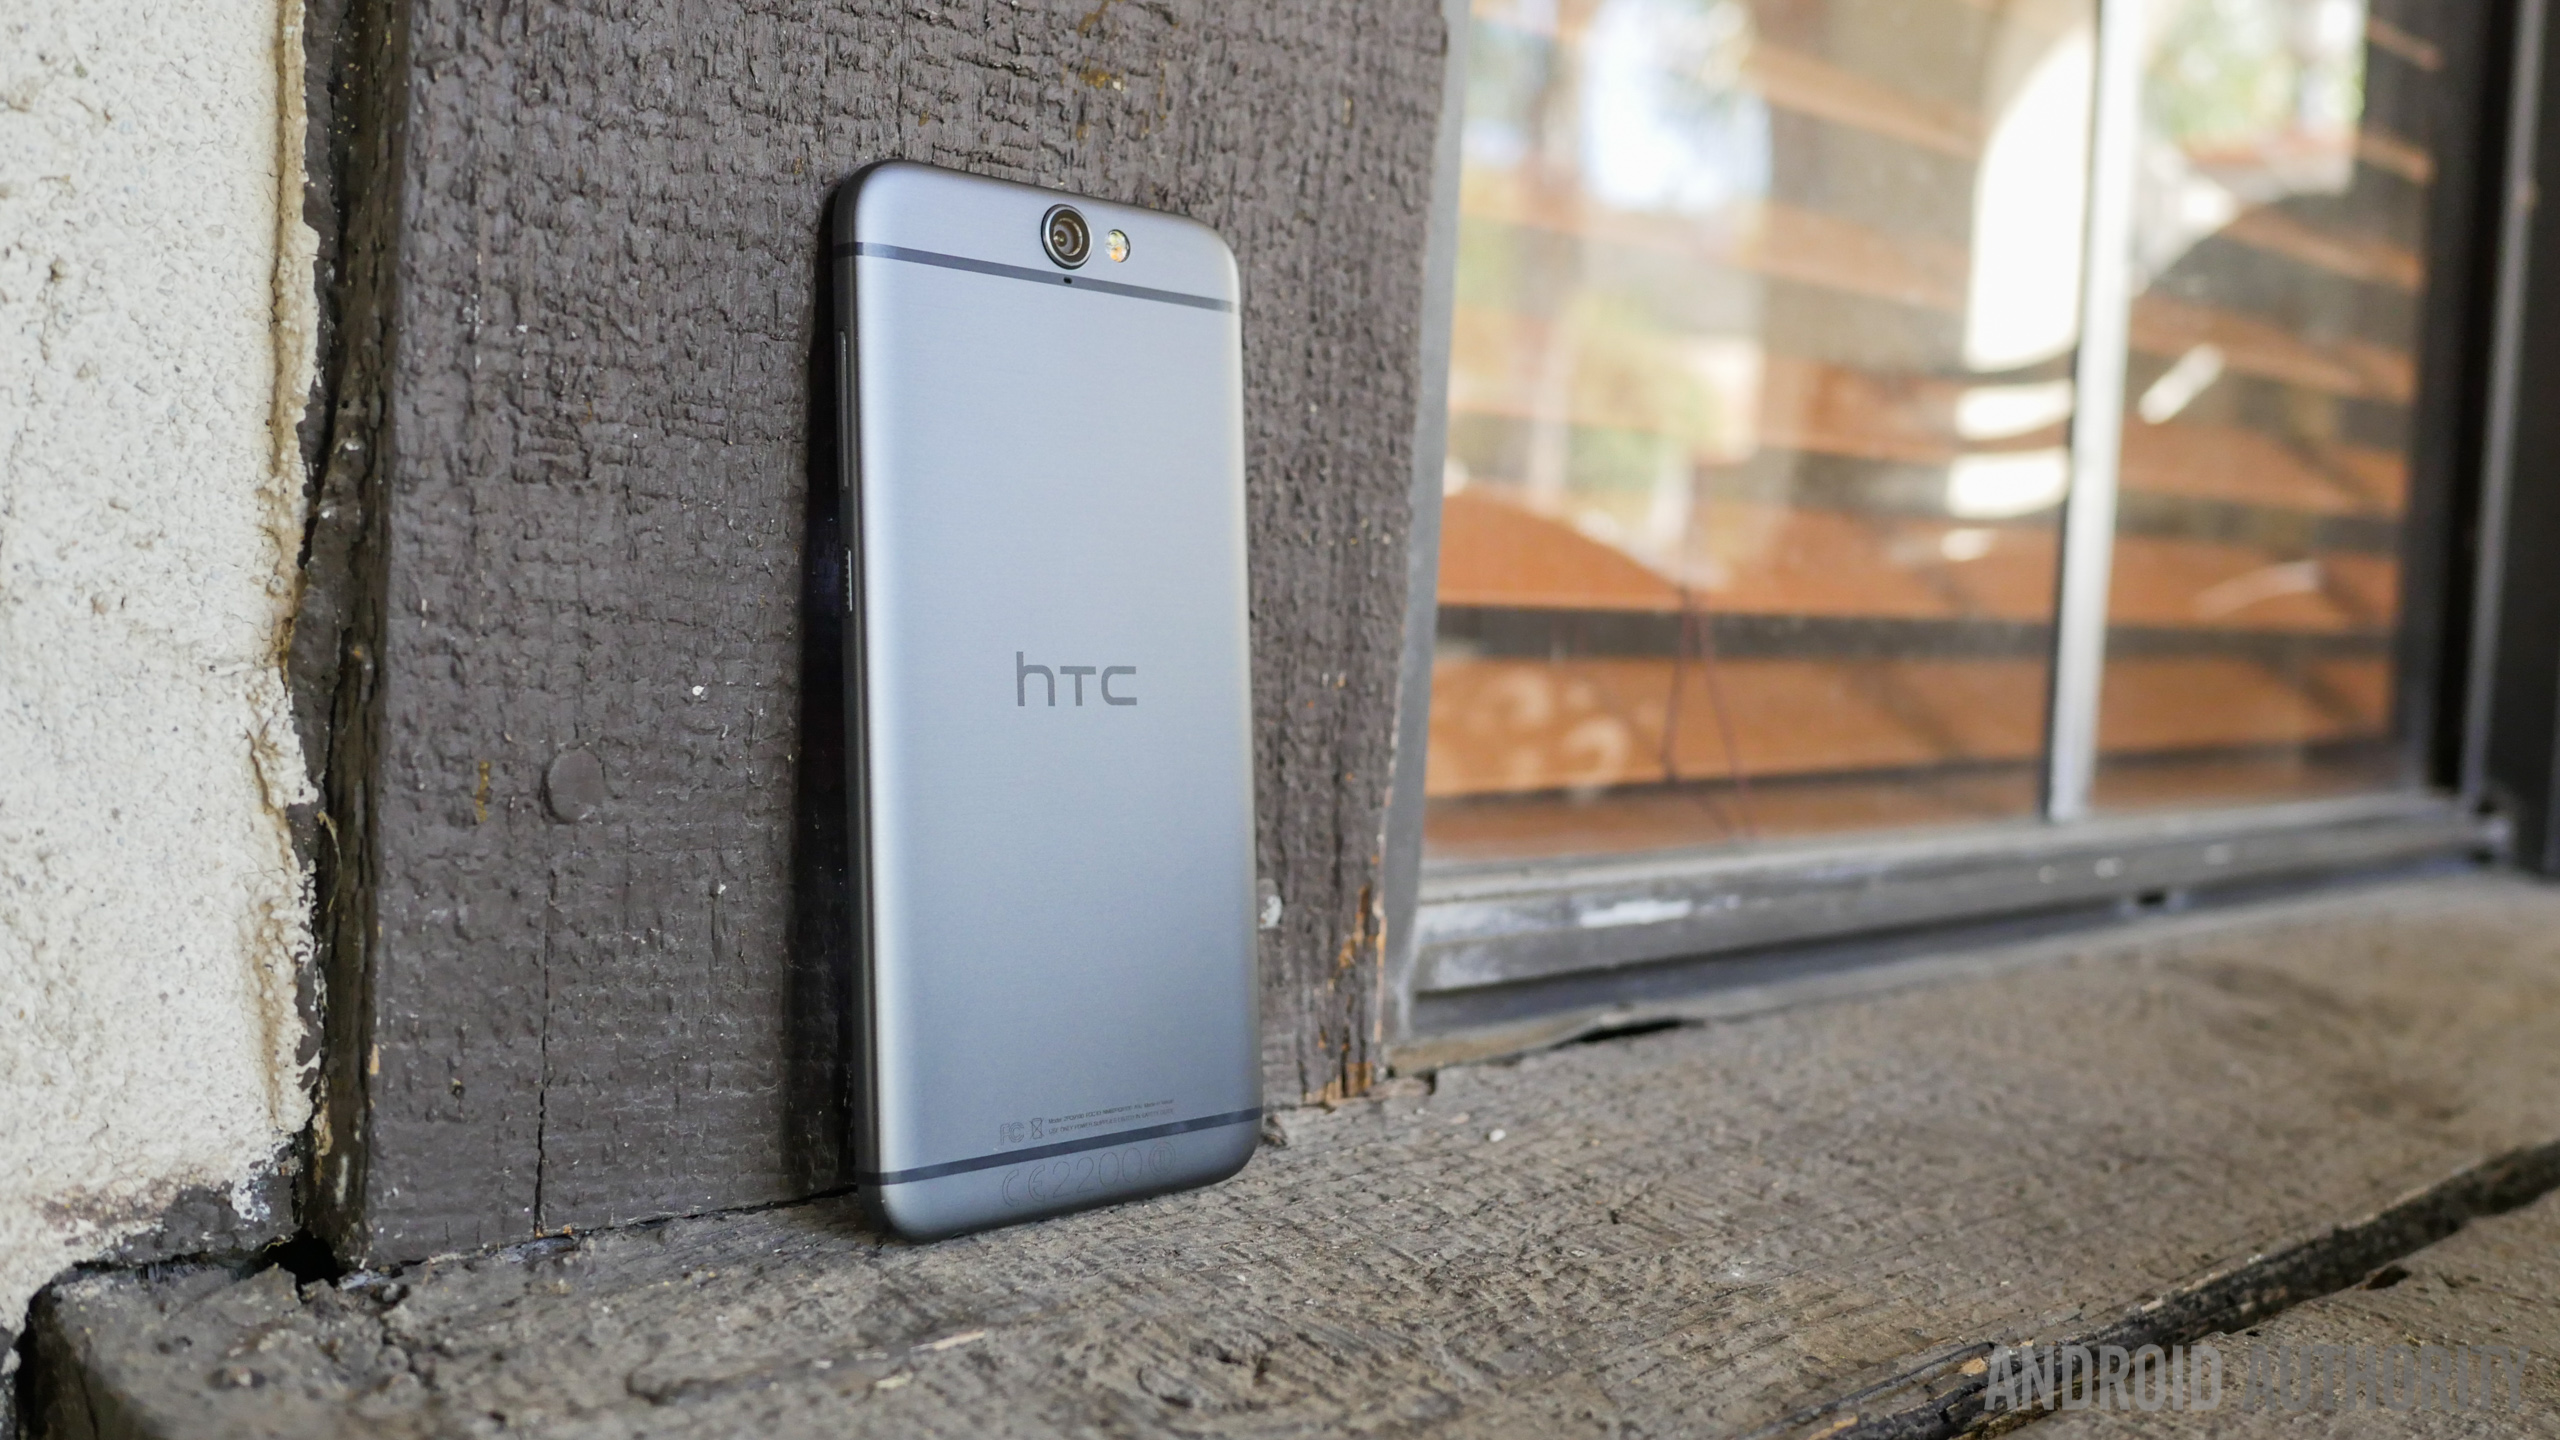 HTC One M10 could look similar to the One A9, pictured here